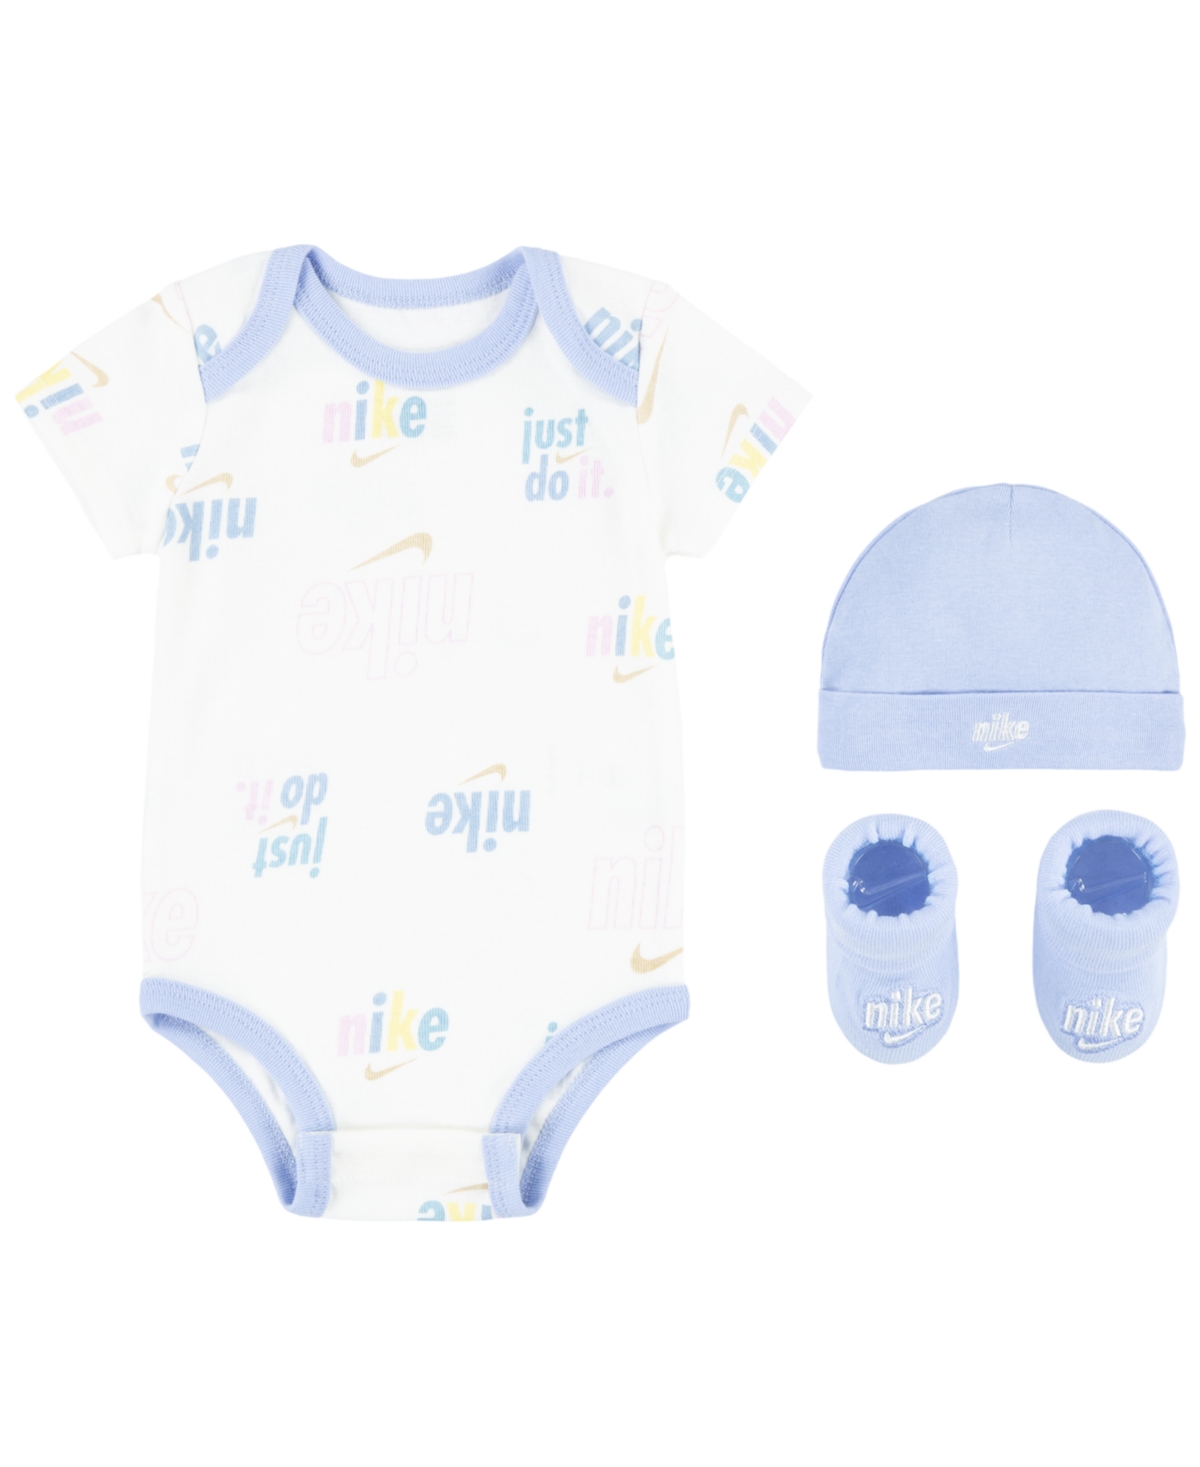 Nike Baby Boys Or Girls All-over Print Bodysuit, Hat And Booties Gift Box Set, 3-piece In Sail